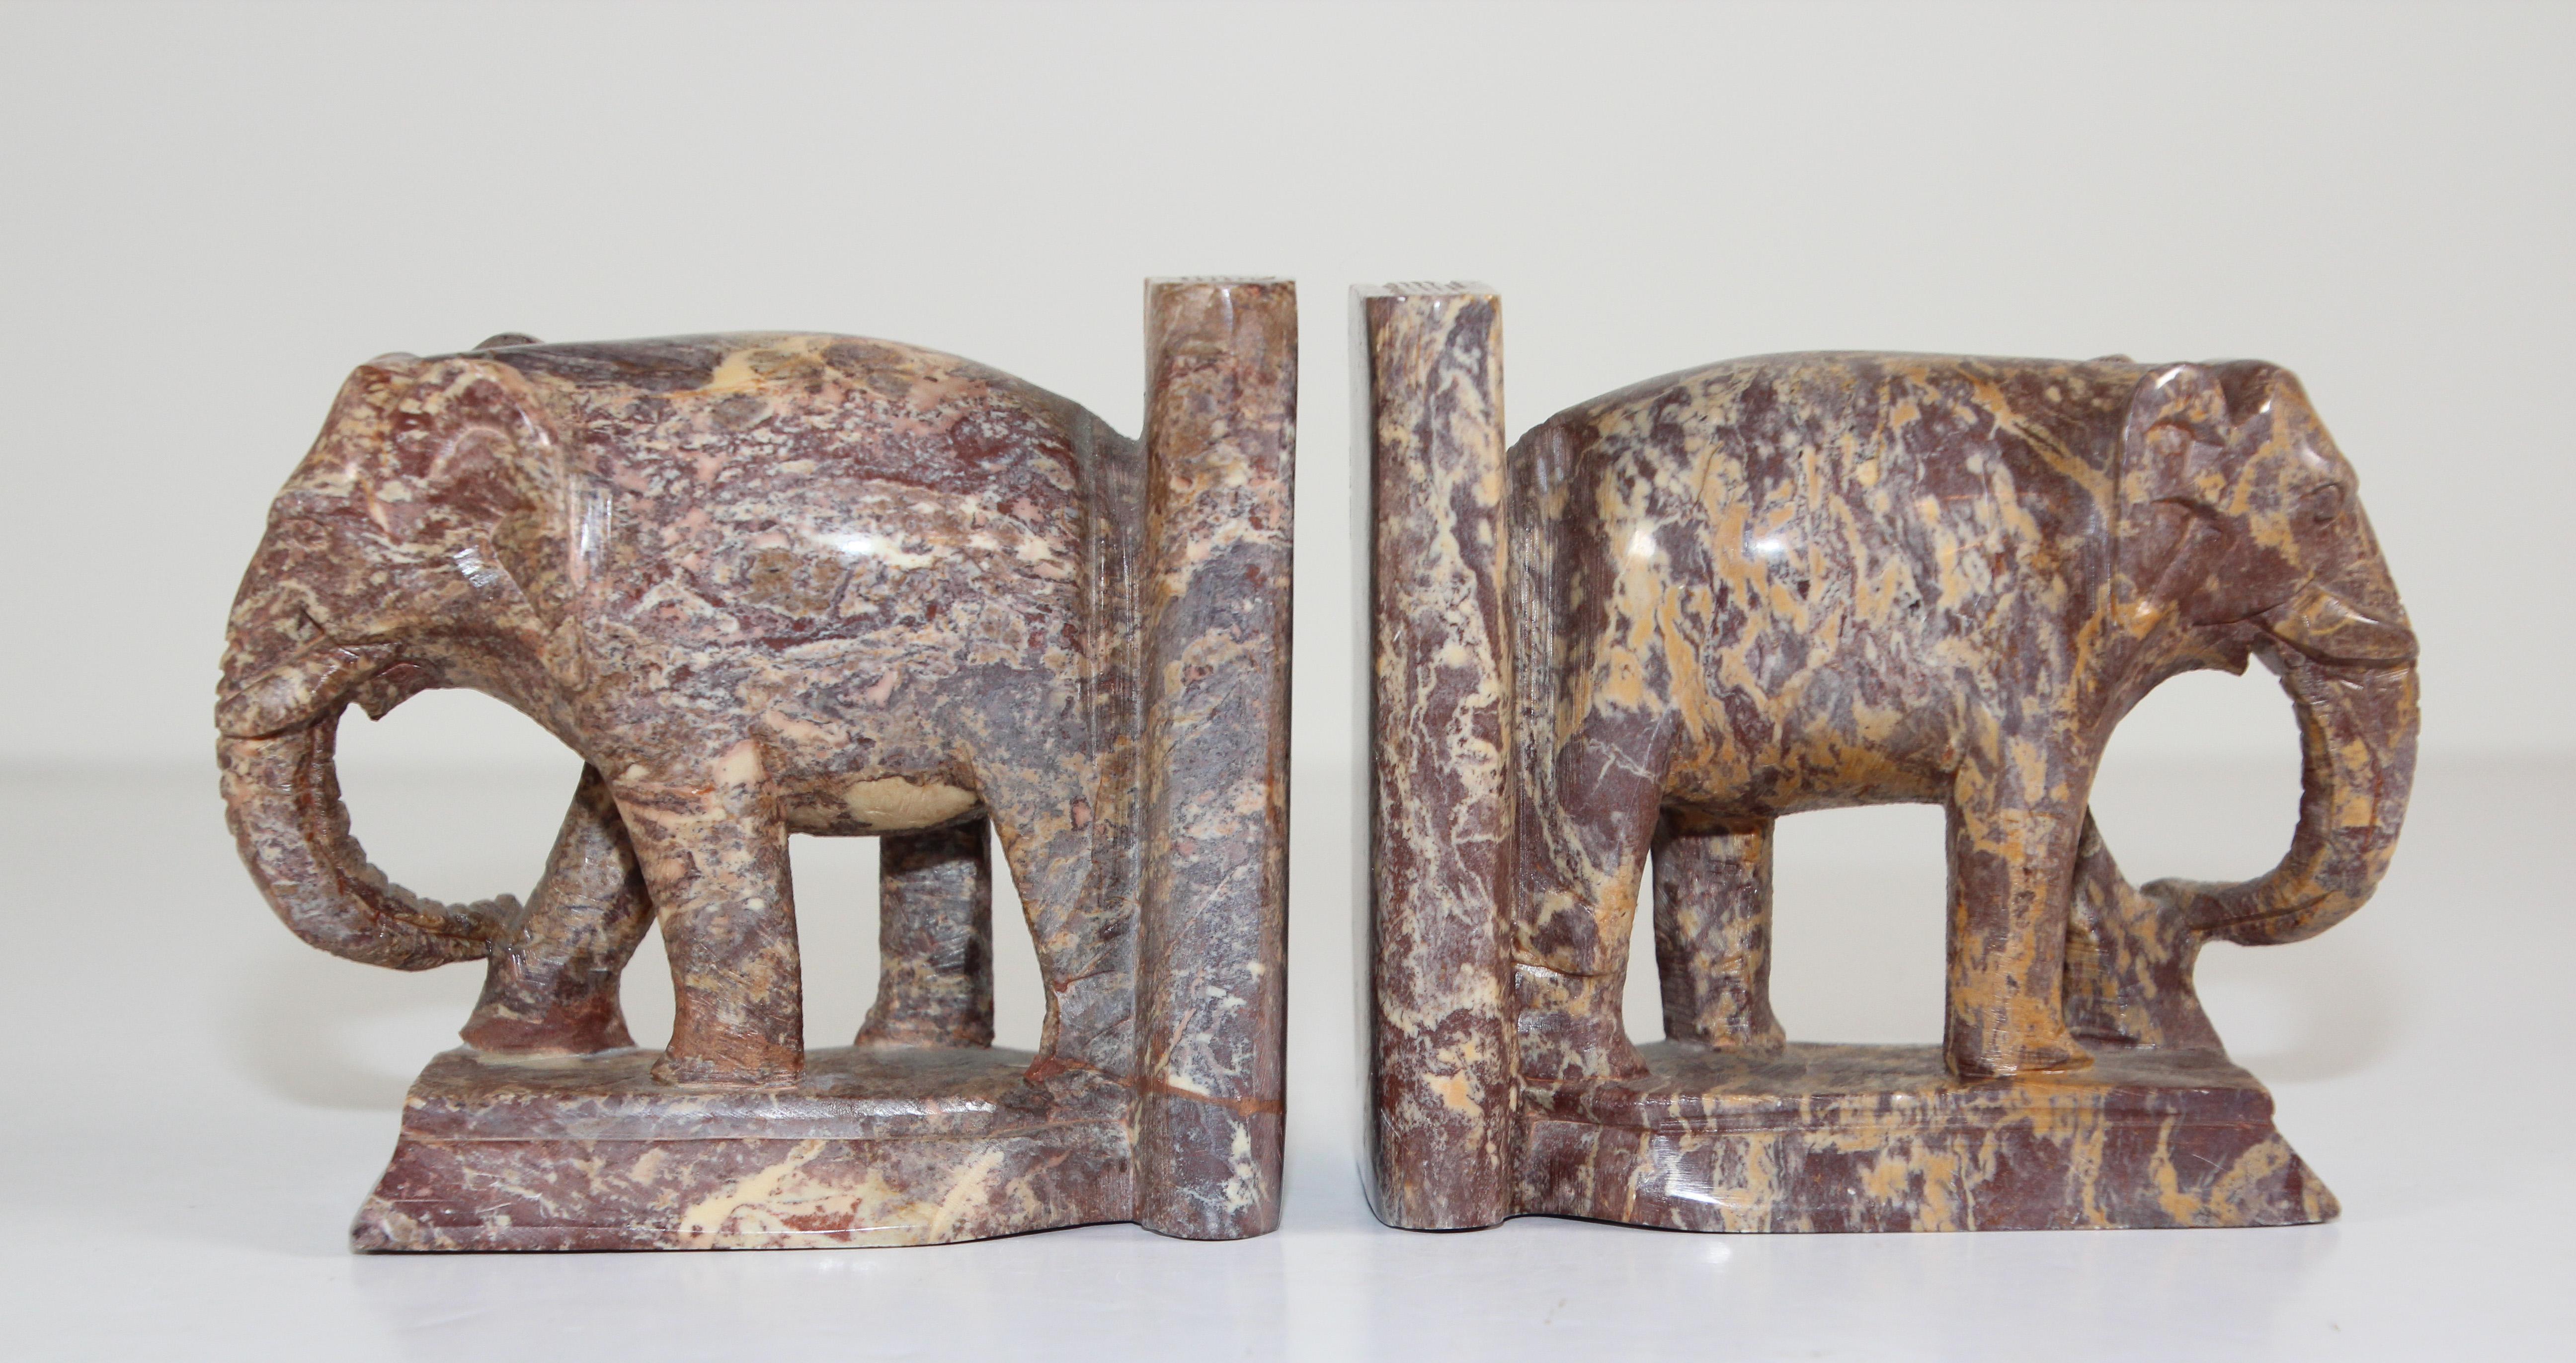 Asian Hand-Carved Elephant Marble Sculpture Bookends, Art Deco Style, 1950s